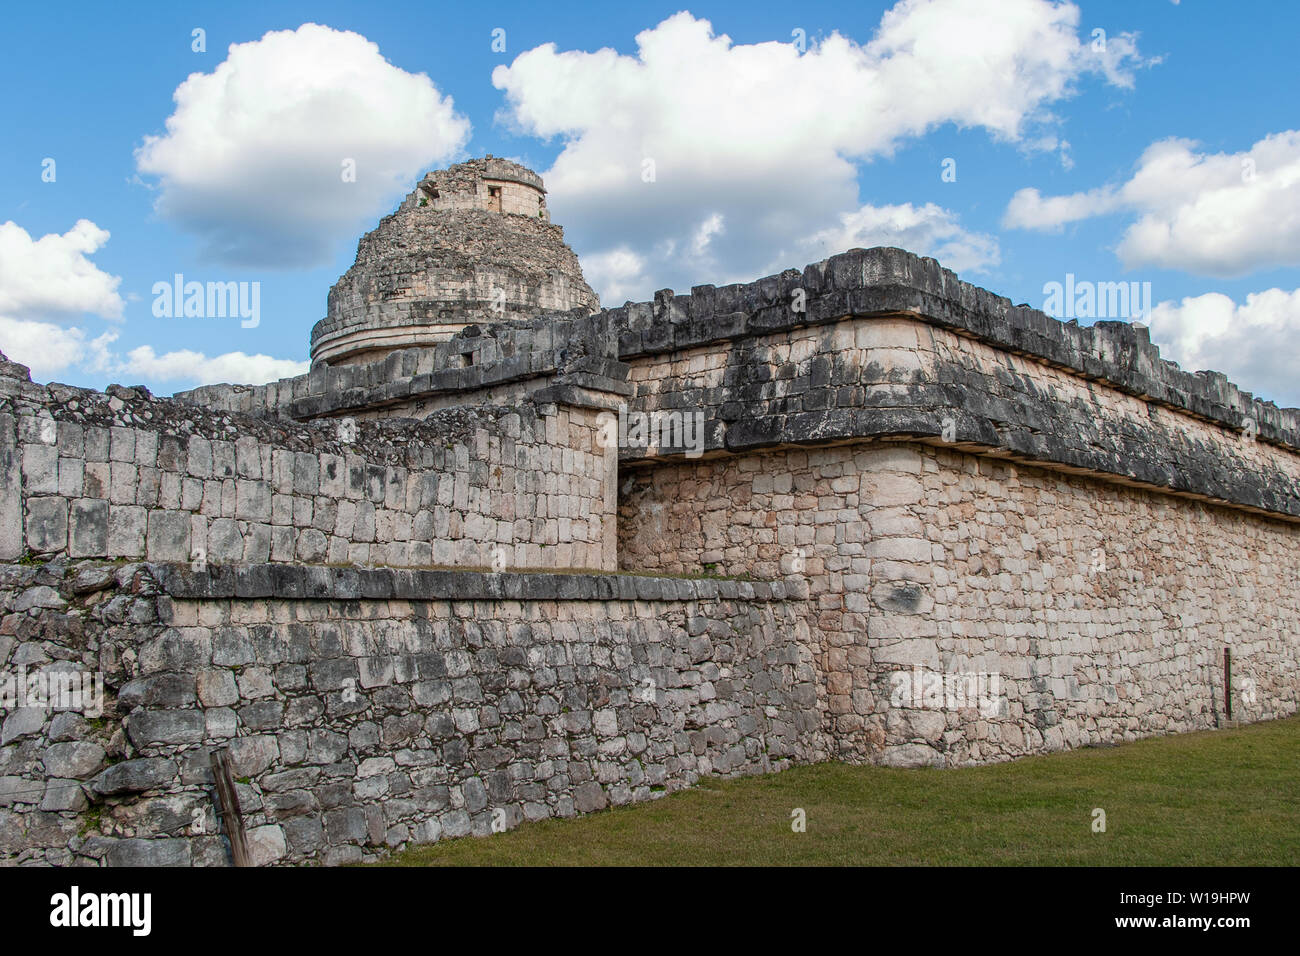 El Caracol, the Observatory at Chichen Itza, Mexico. Stock Photo